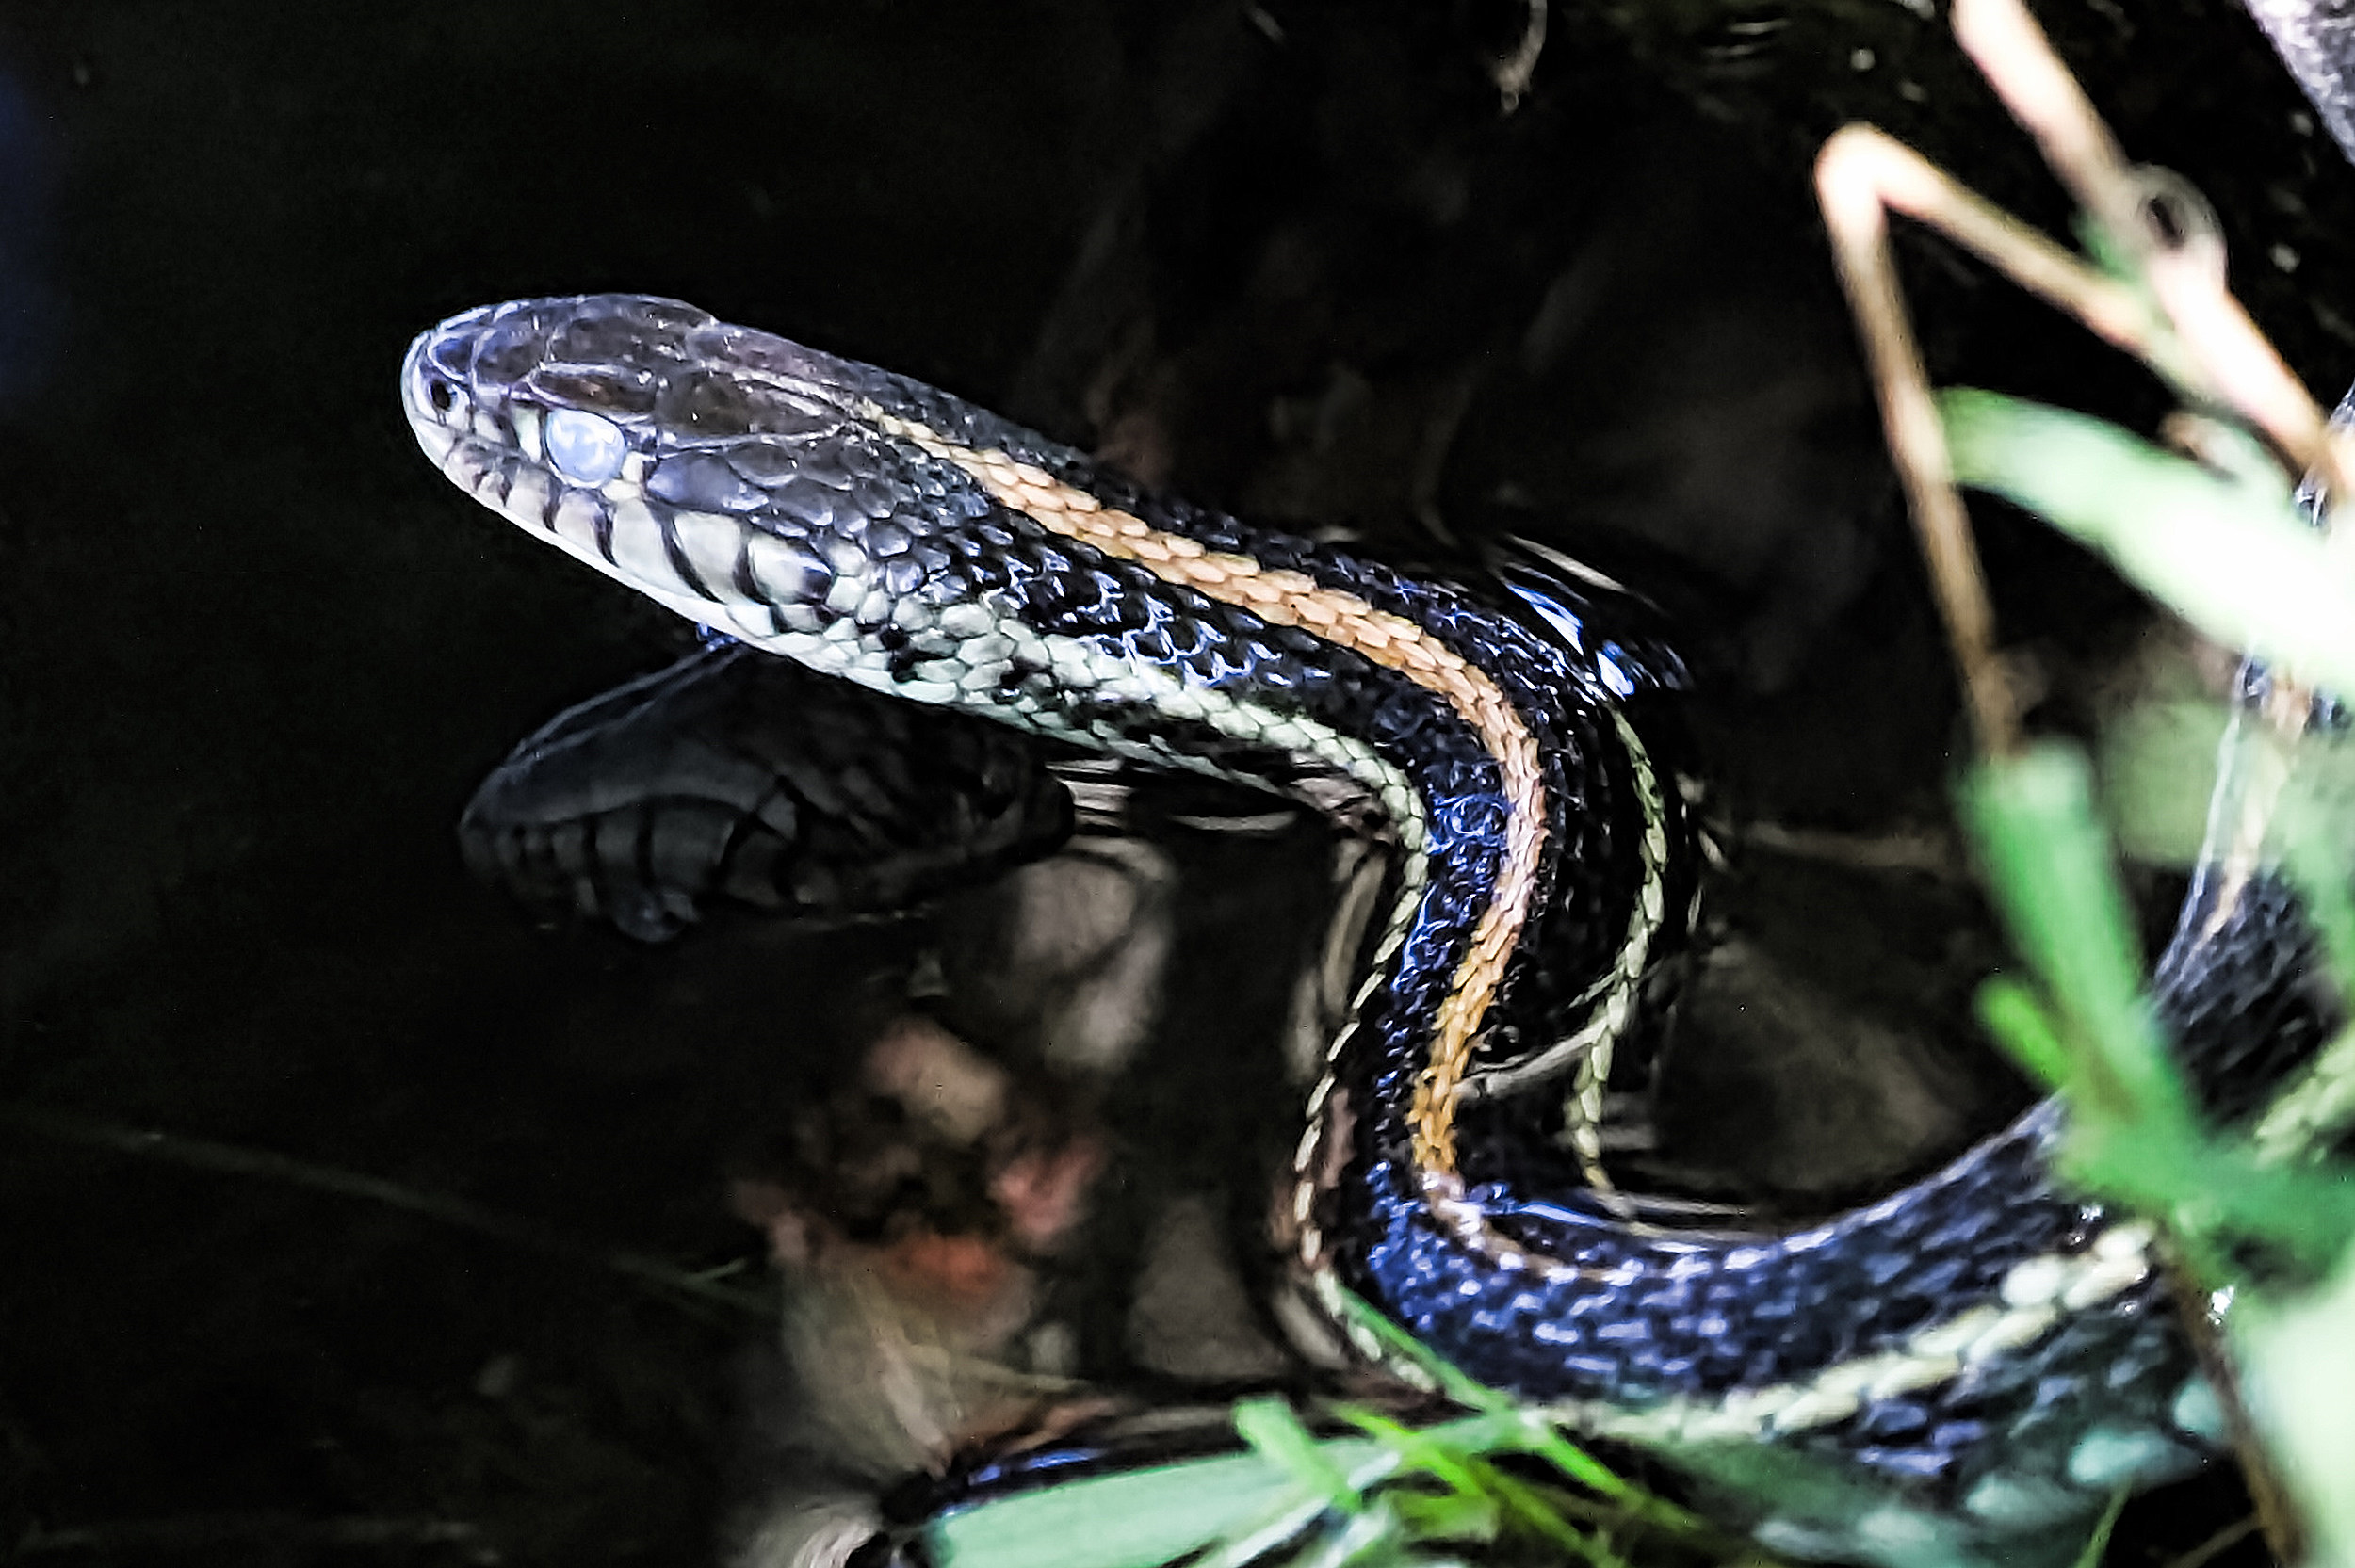 Closeup of a garter snake head with its' reflection in water